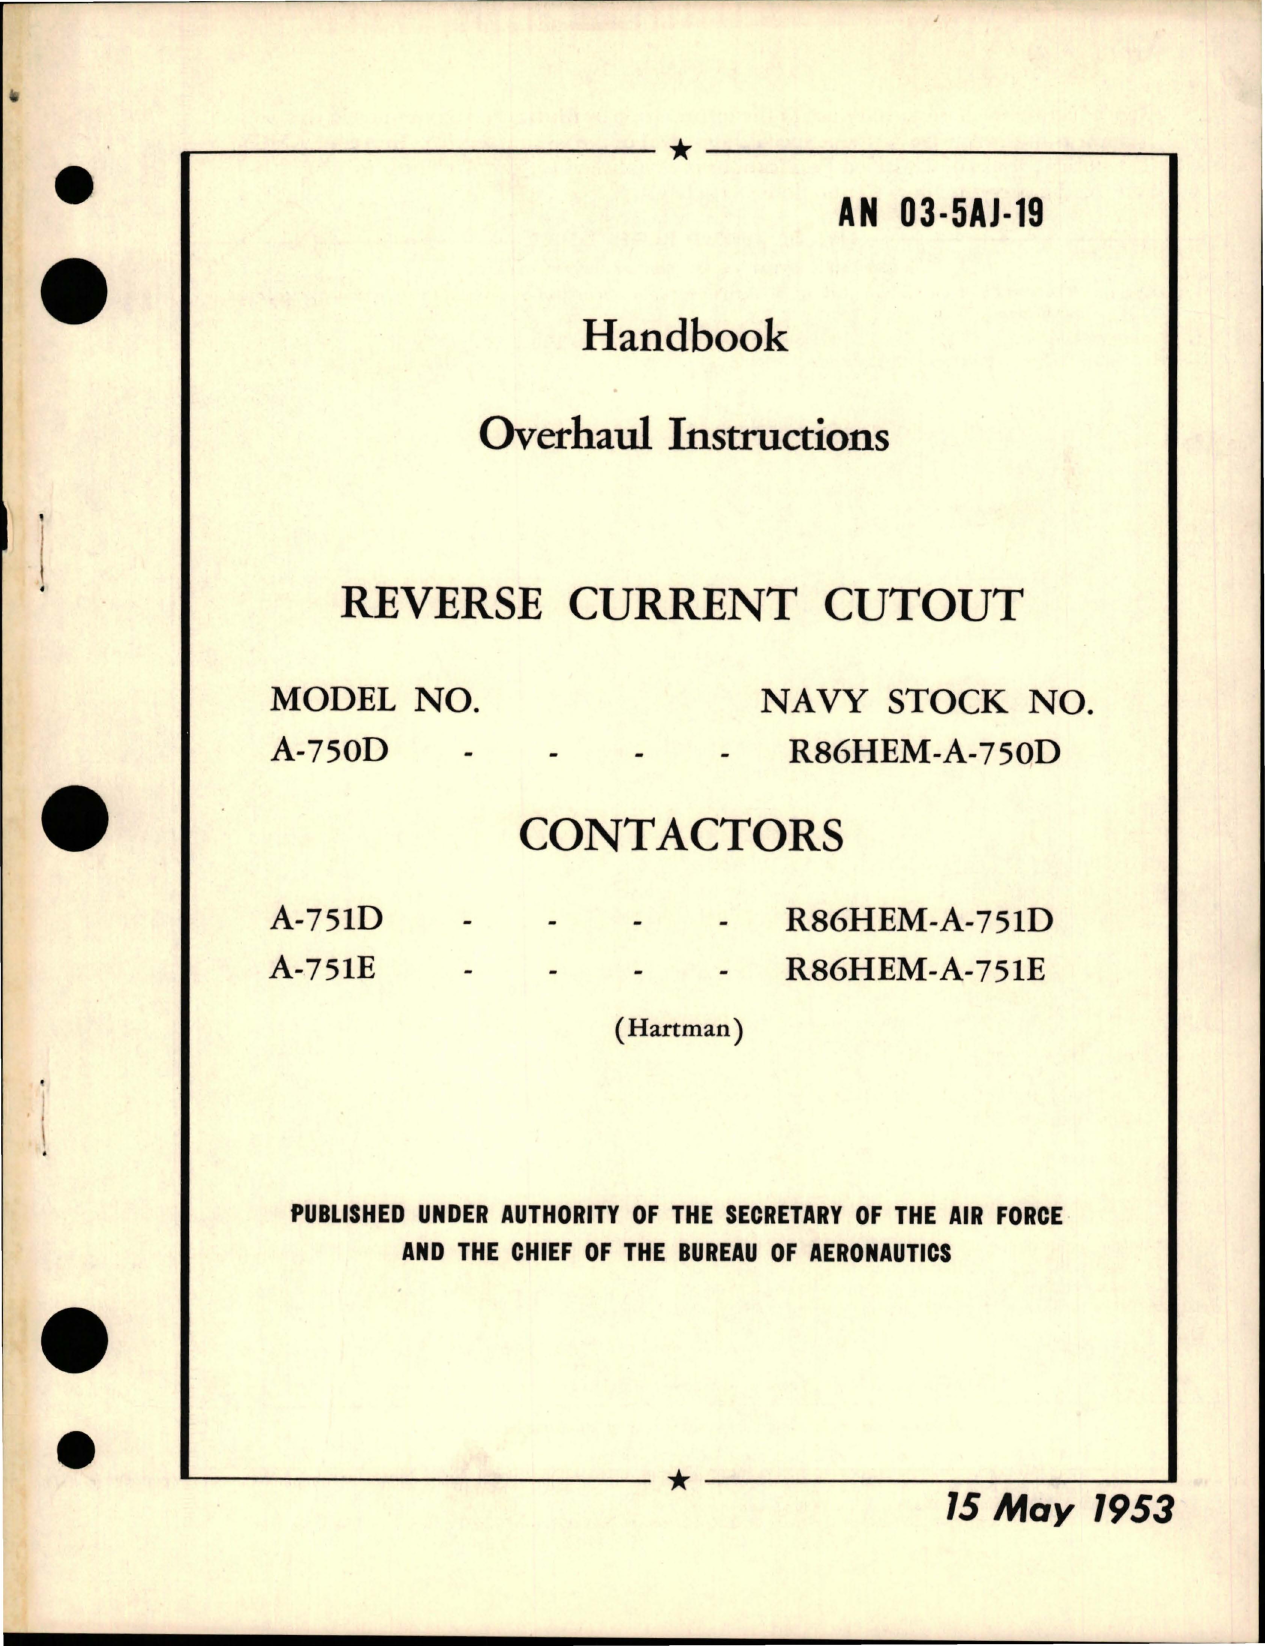 Sample page 1 from AirCorps Library document: Overhaul Instructions for Reverse Current Cutout - Model A-750D and Contactors - Models A-751D and A-751E